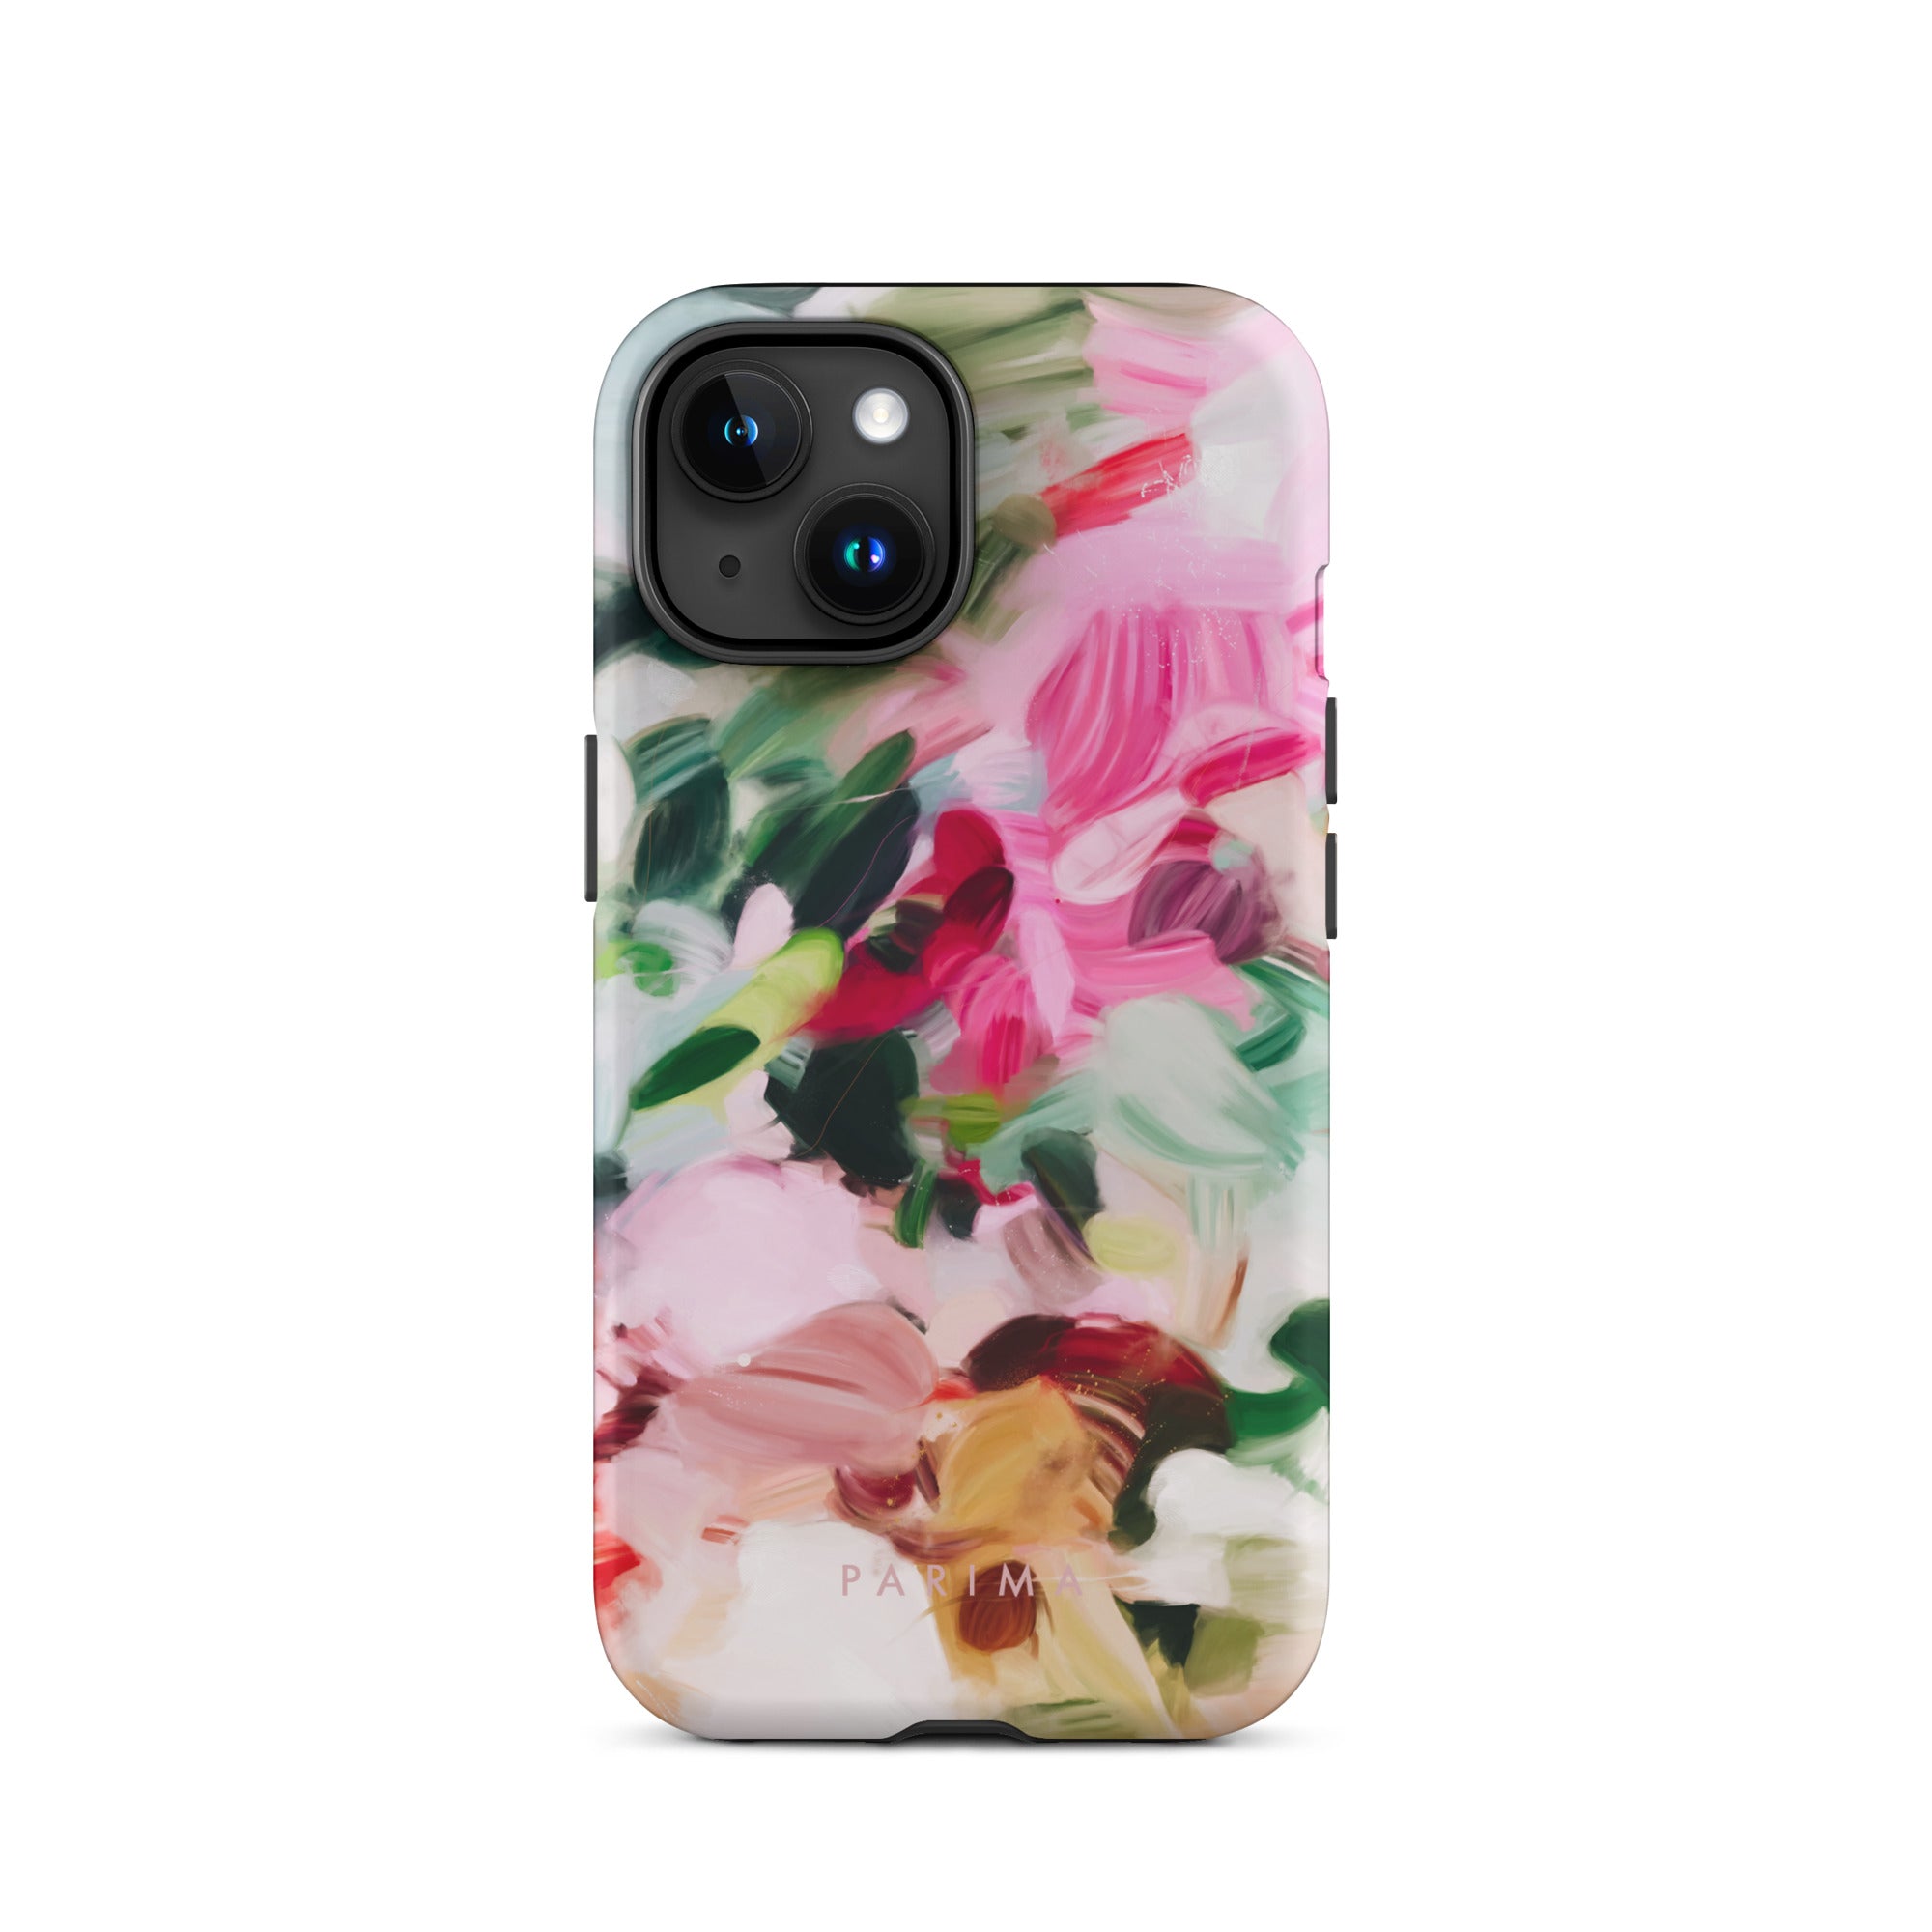 Bloom, pink and green abstract art - iPhone 15 tough case by Parima Studio